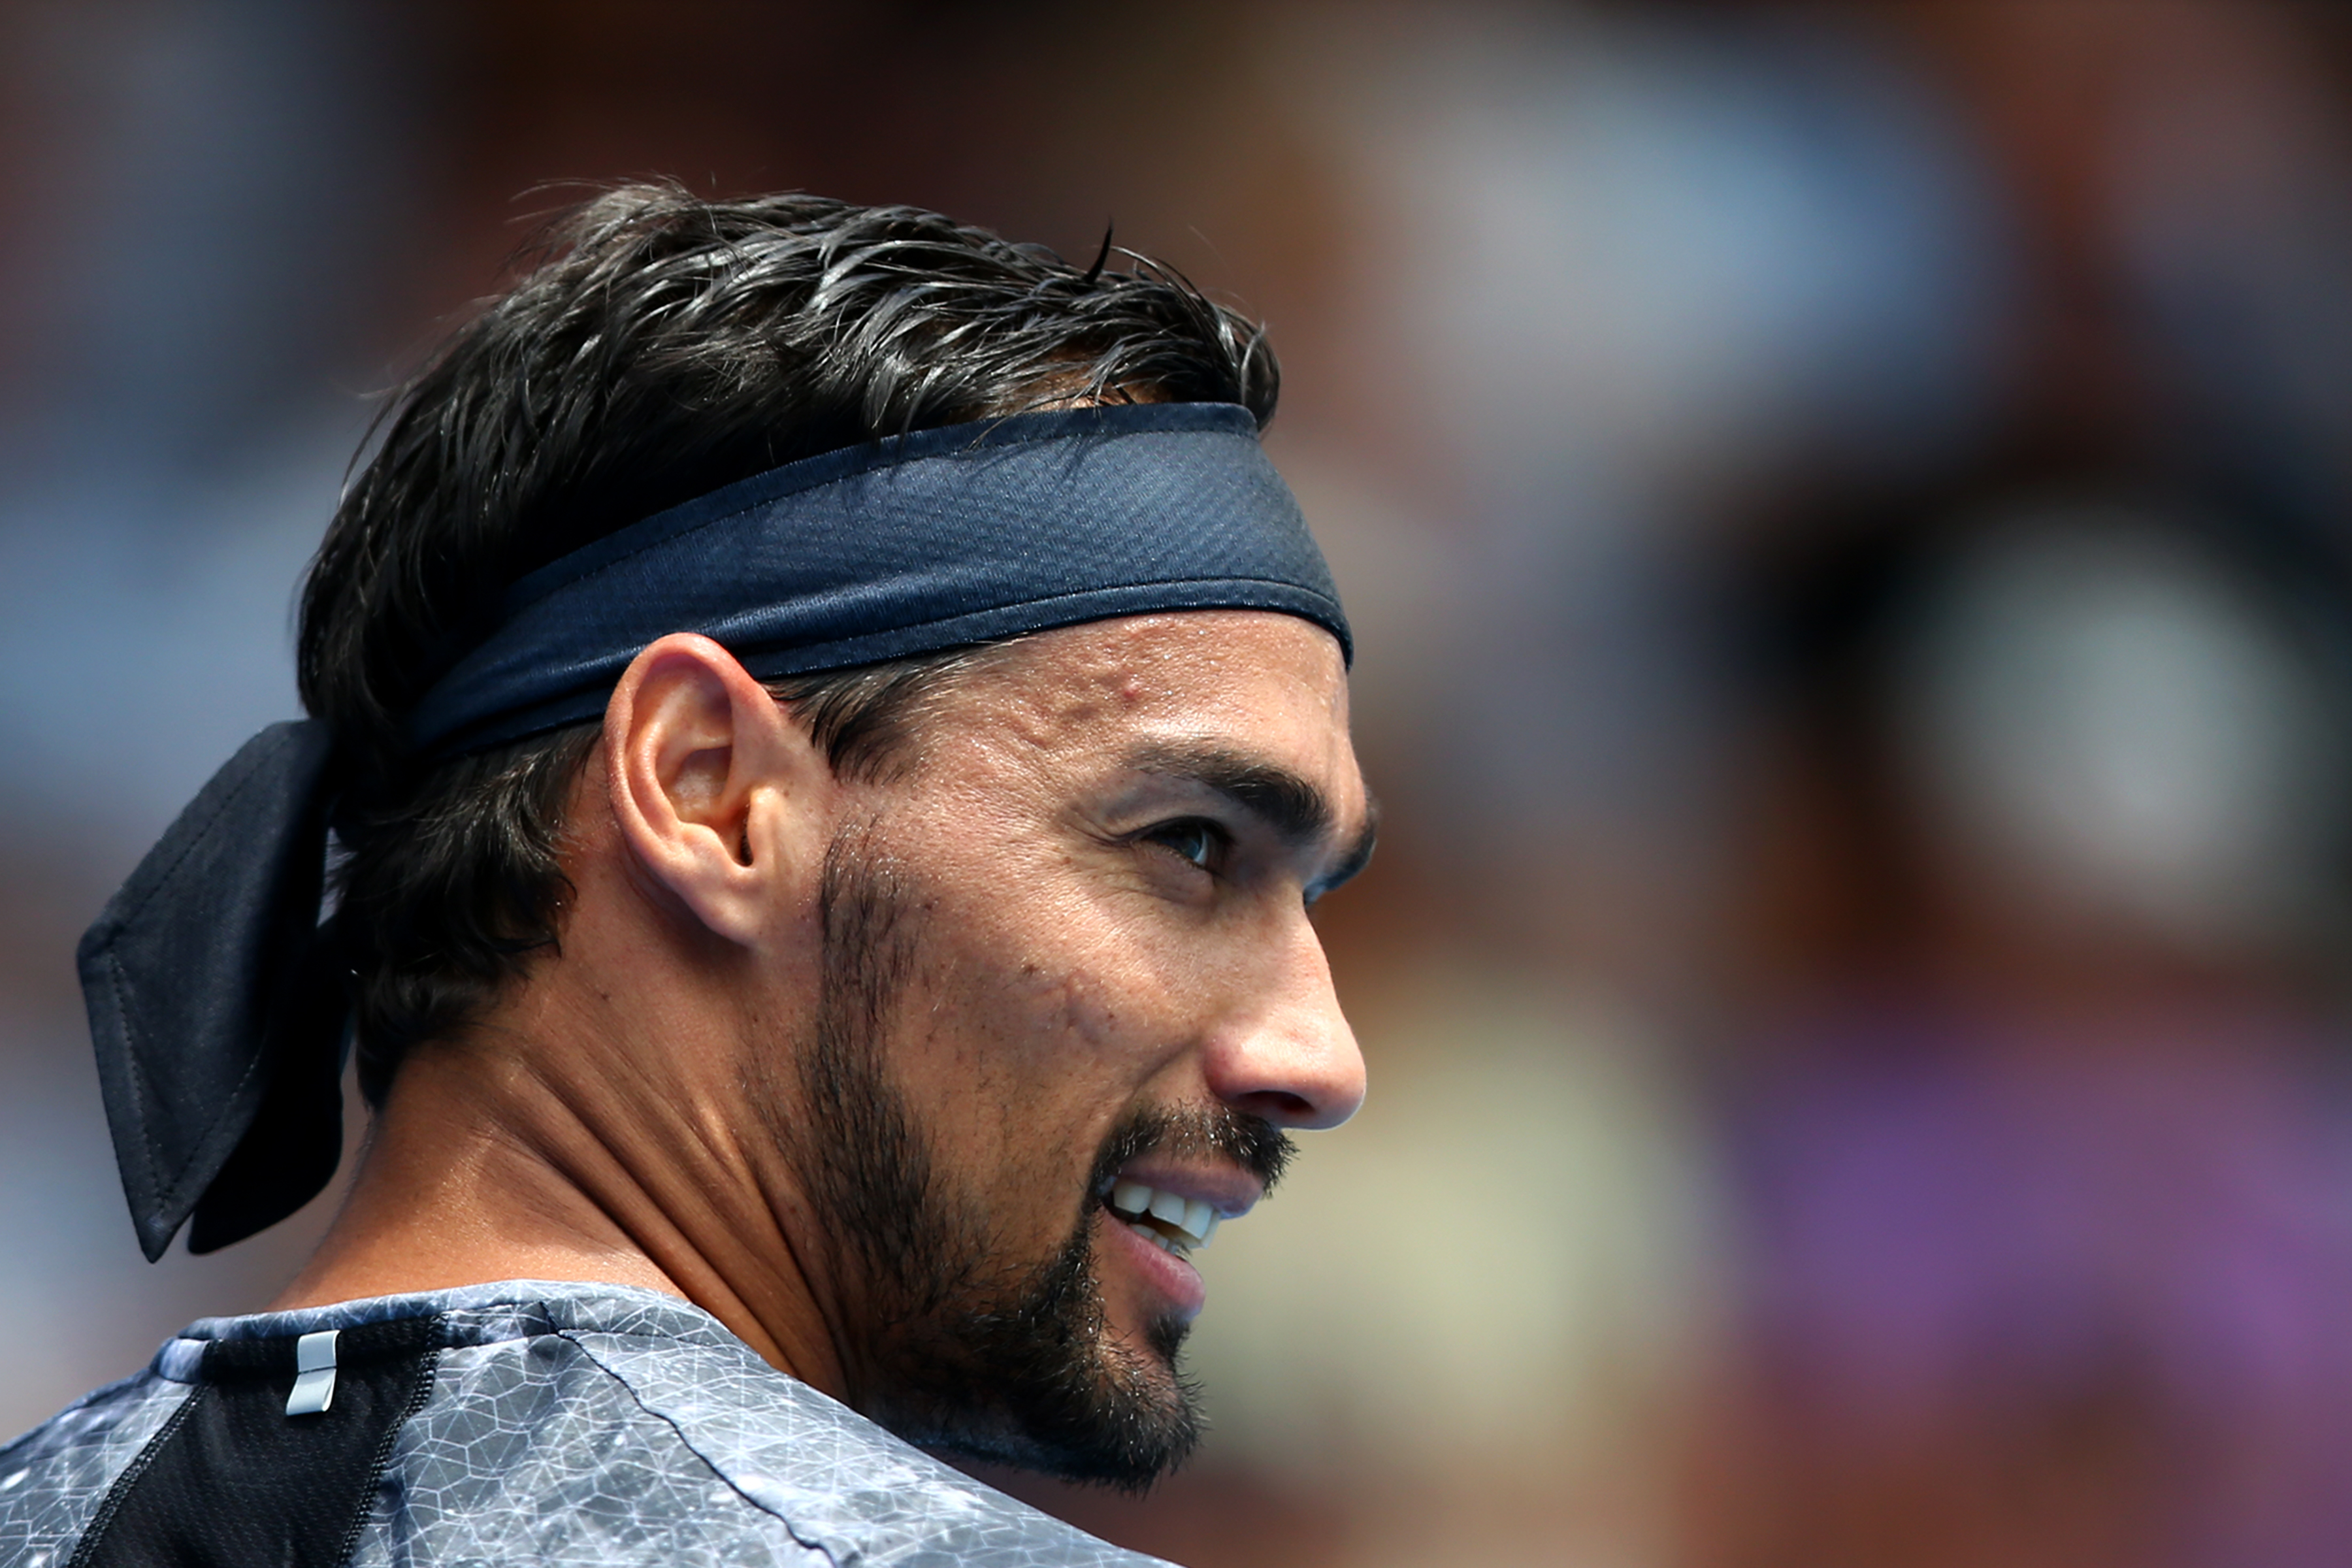 AUCKLAND, NEW ZEALAND - JANUARY 10: Fabio Fognini of Italy looks on during his quarter final match against Philipp Kohlschreiber of Germany during the ASB Classic at the ASB Tennis Centre on January 10, 2019 in Auckland, New Zealand. (Photo by Hannah Peters/Getty Images)